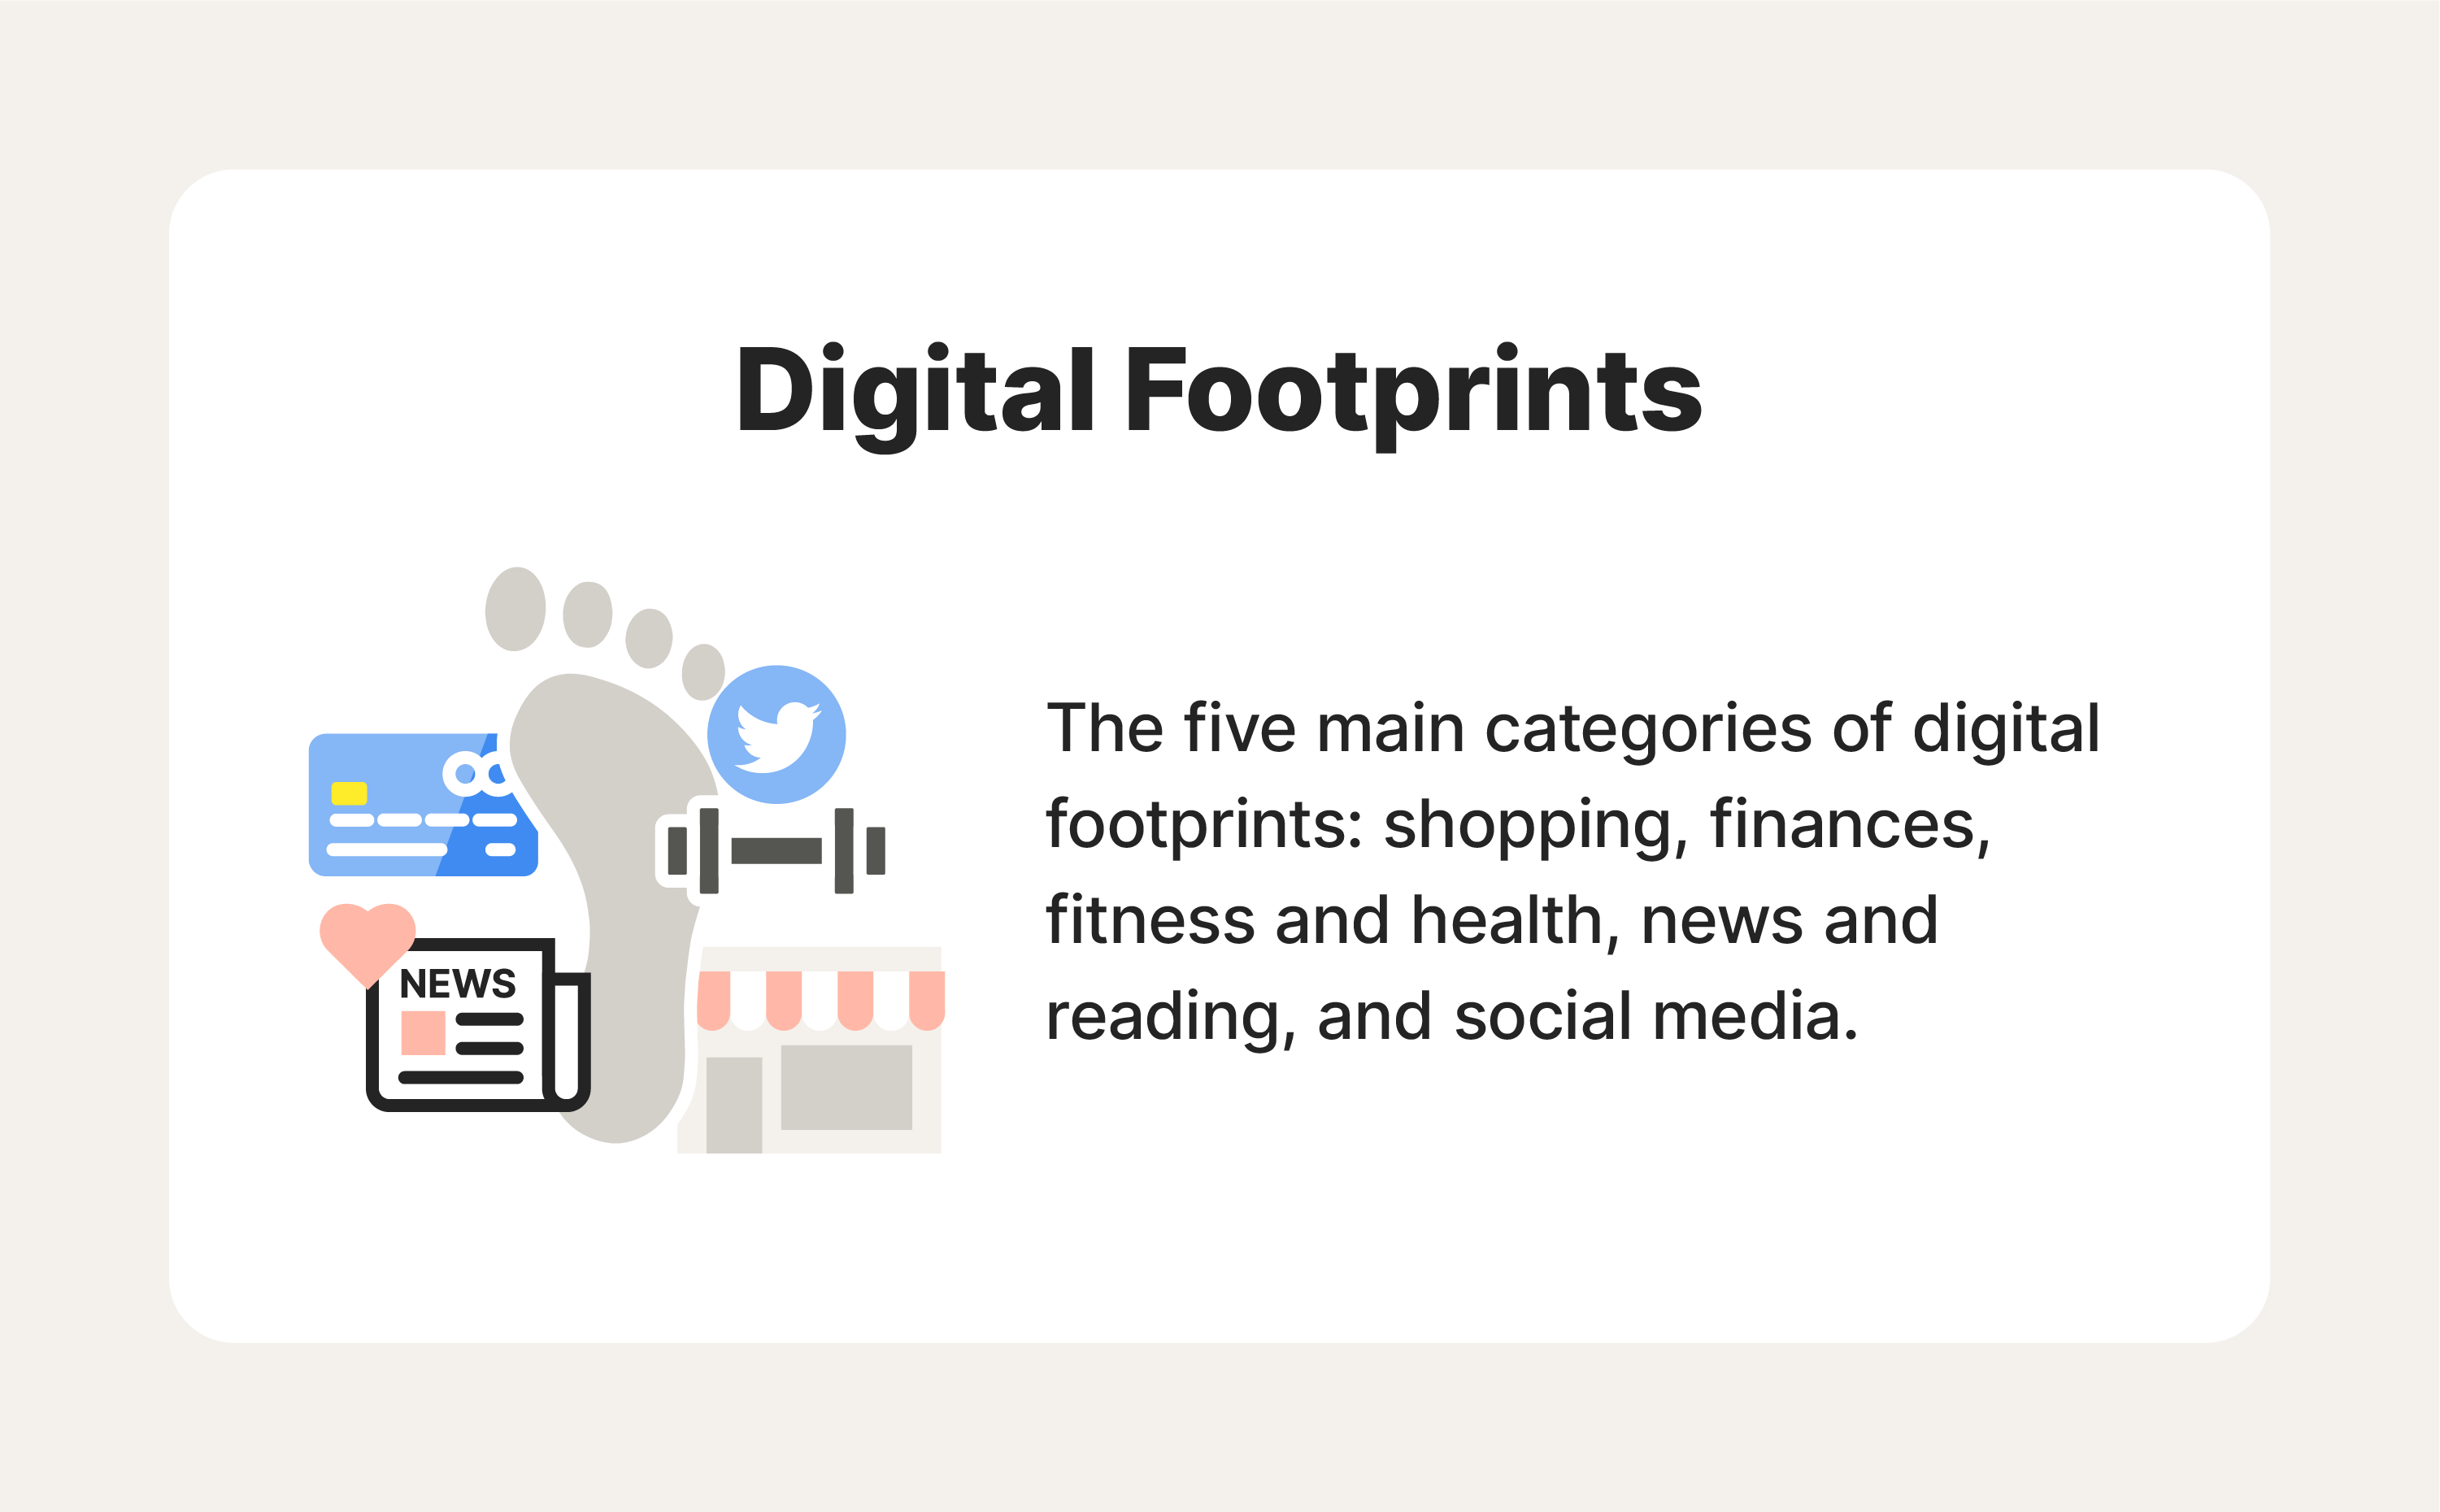 Graphic showing the five main categories of digital footprints.